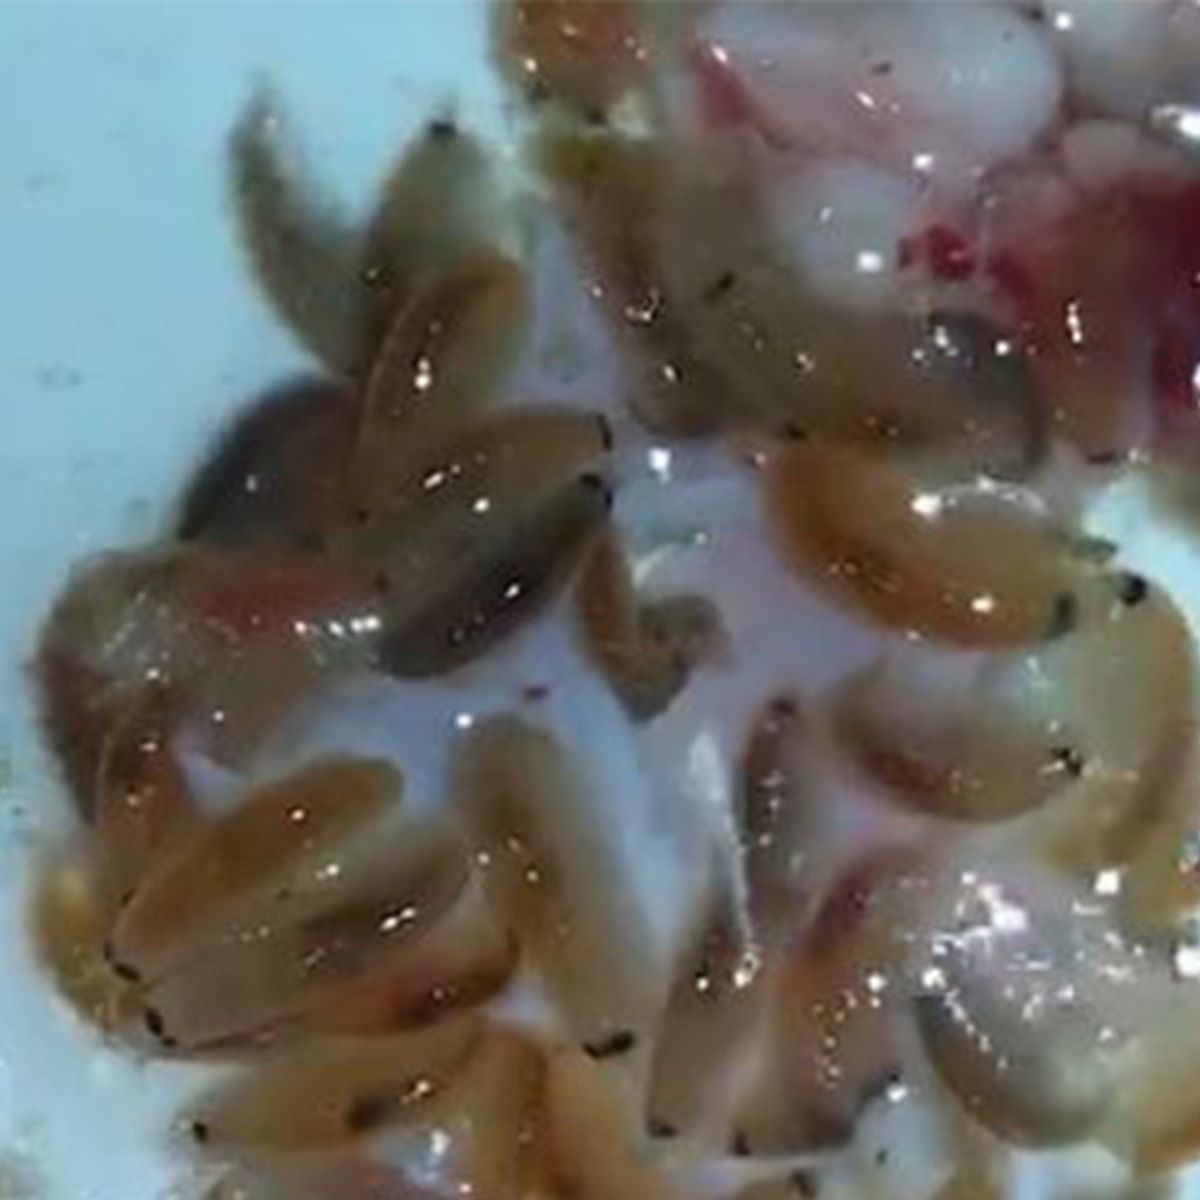 Did an Australian Teen Get Attacked by Flesh-Eating Sea Bugs?